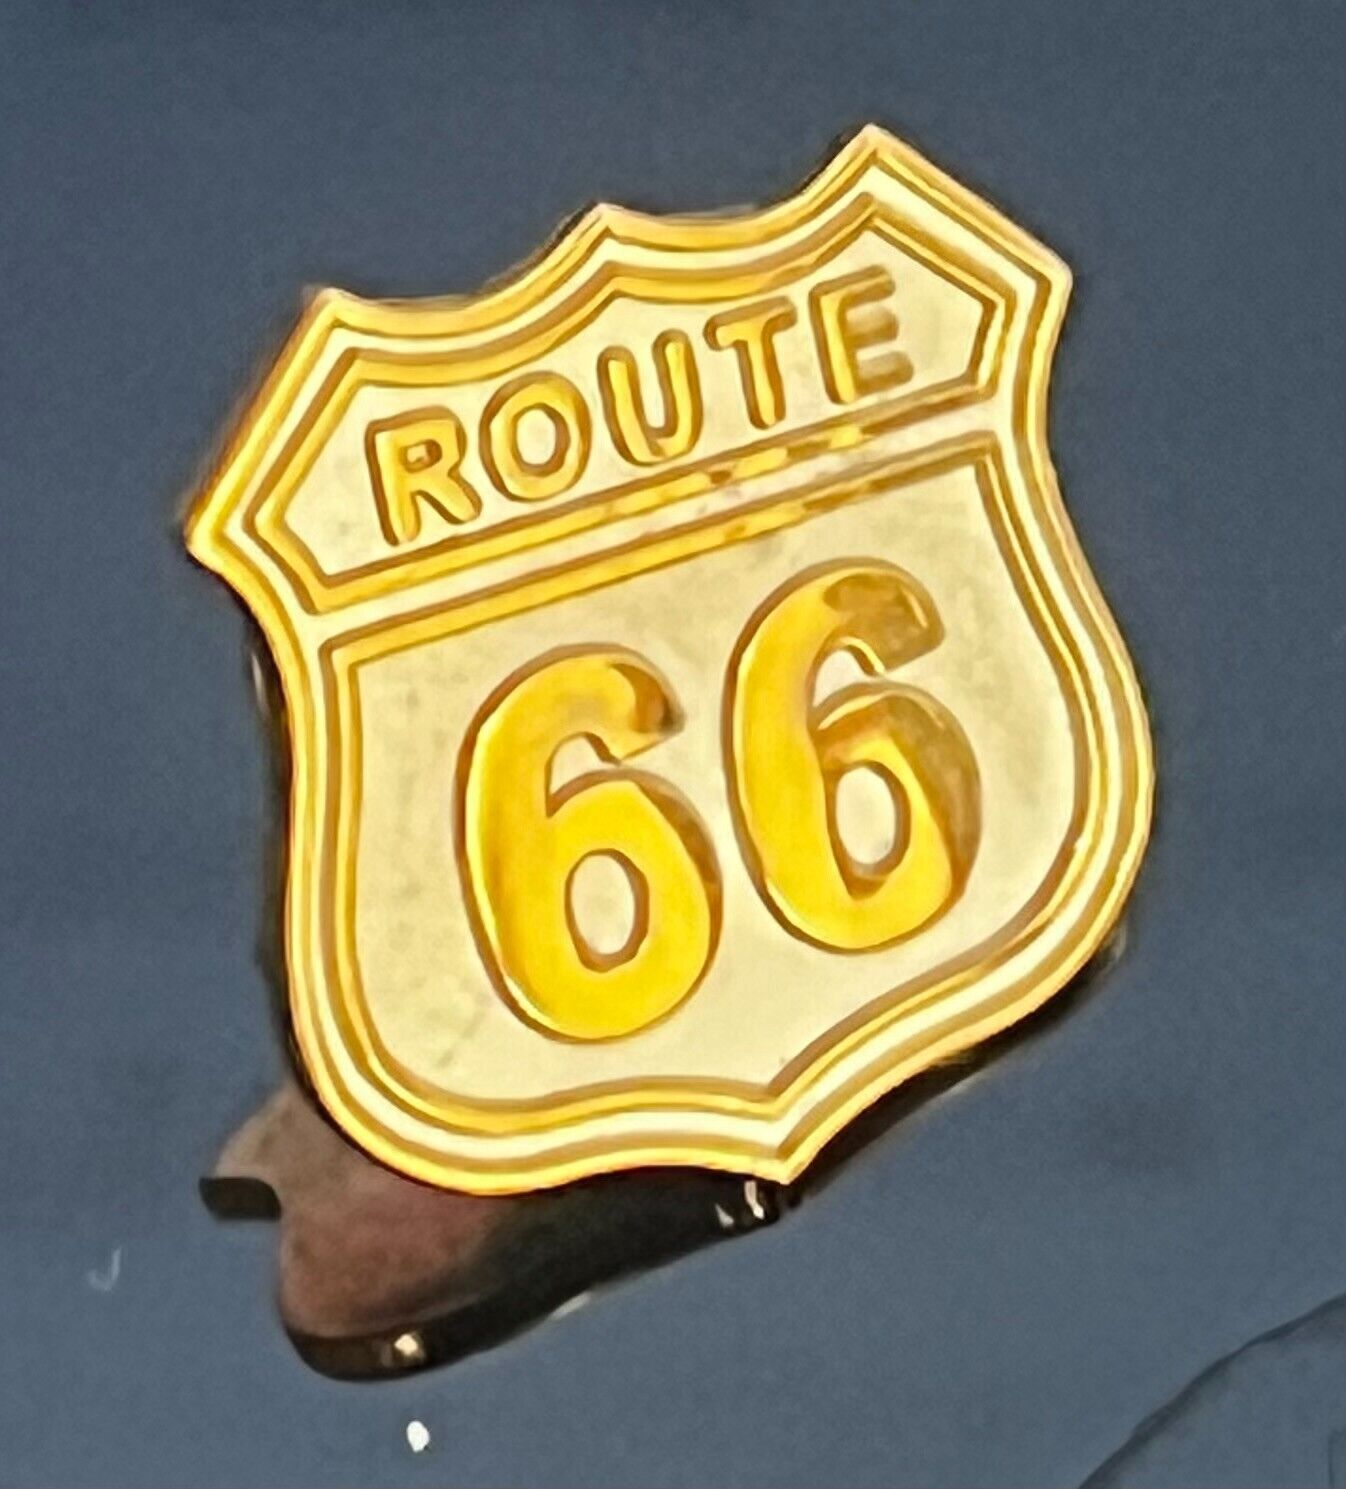 Route 66 two tone (gold look on silver look) Lapel Hat Pin